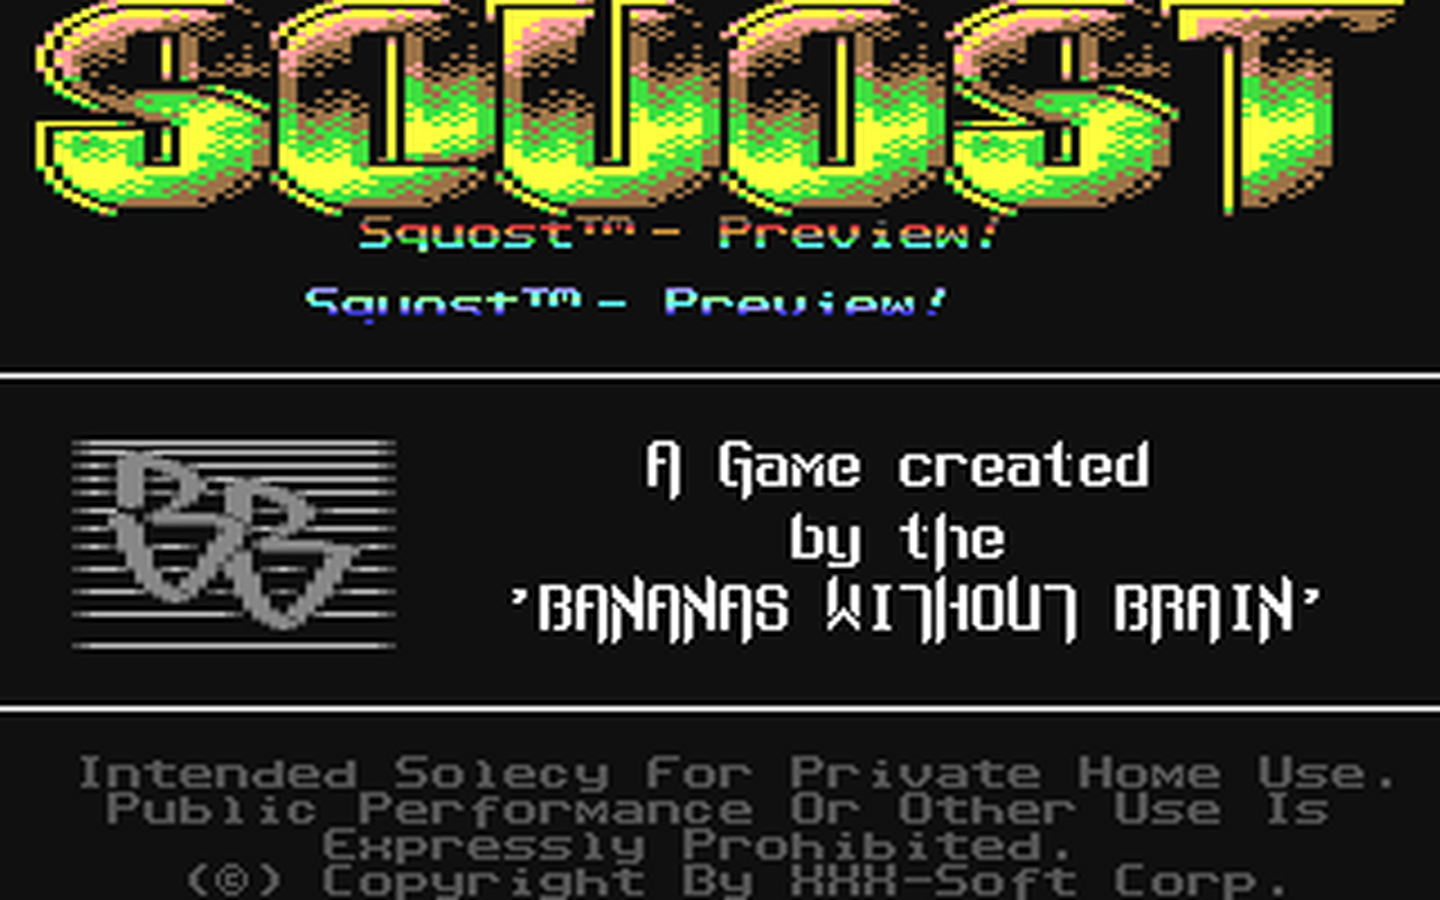 C64 GameBase Squost_[Preview] [XXX-Soft_Corp.] 1993